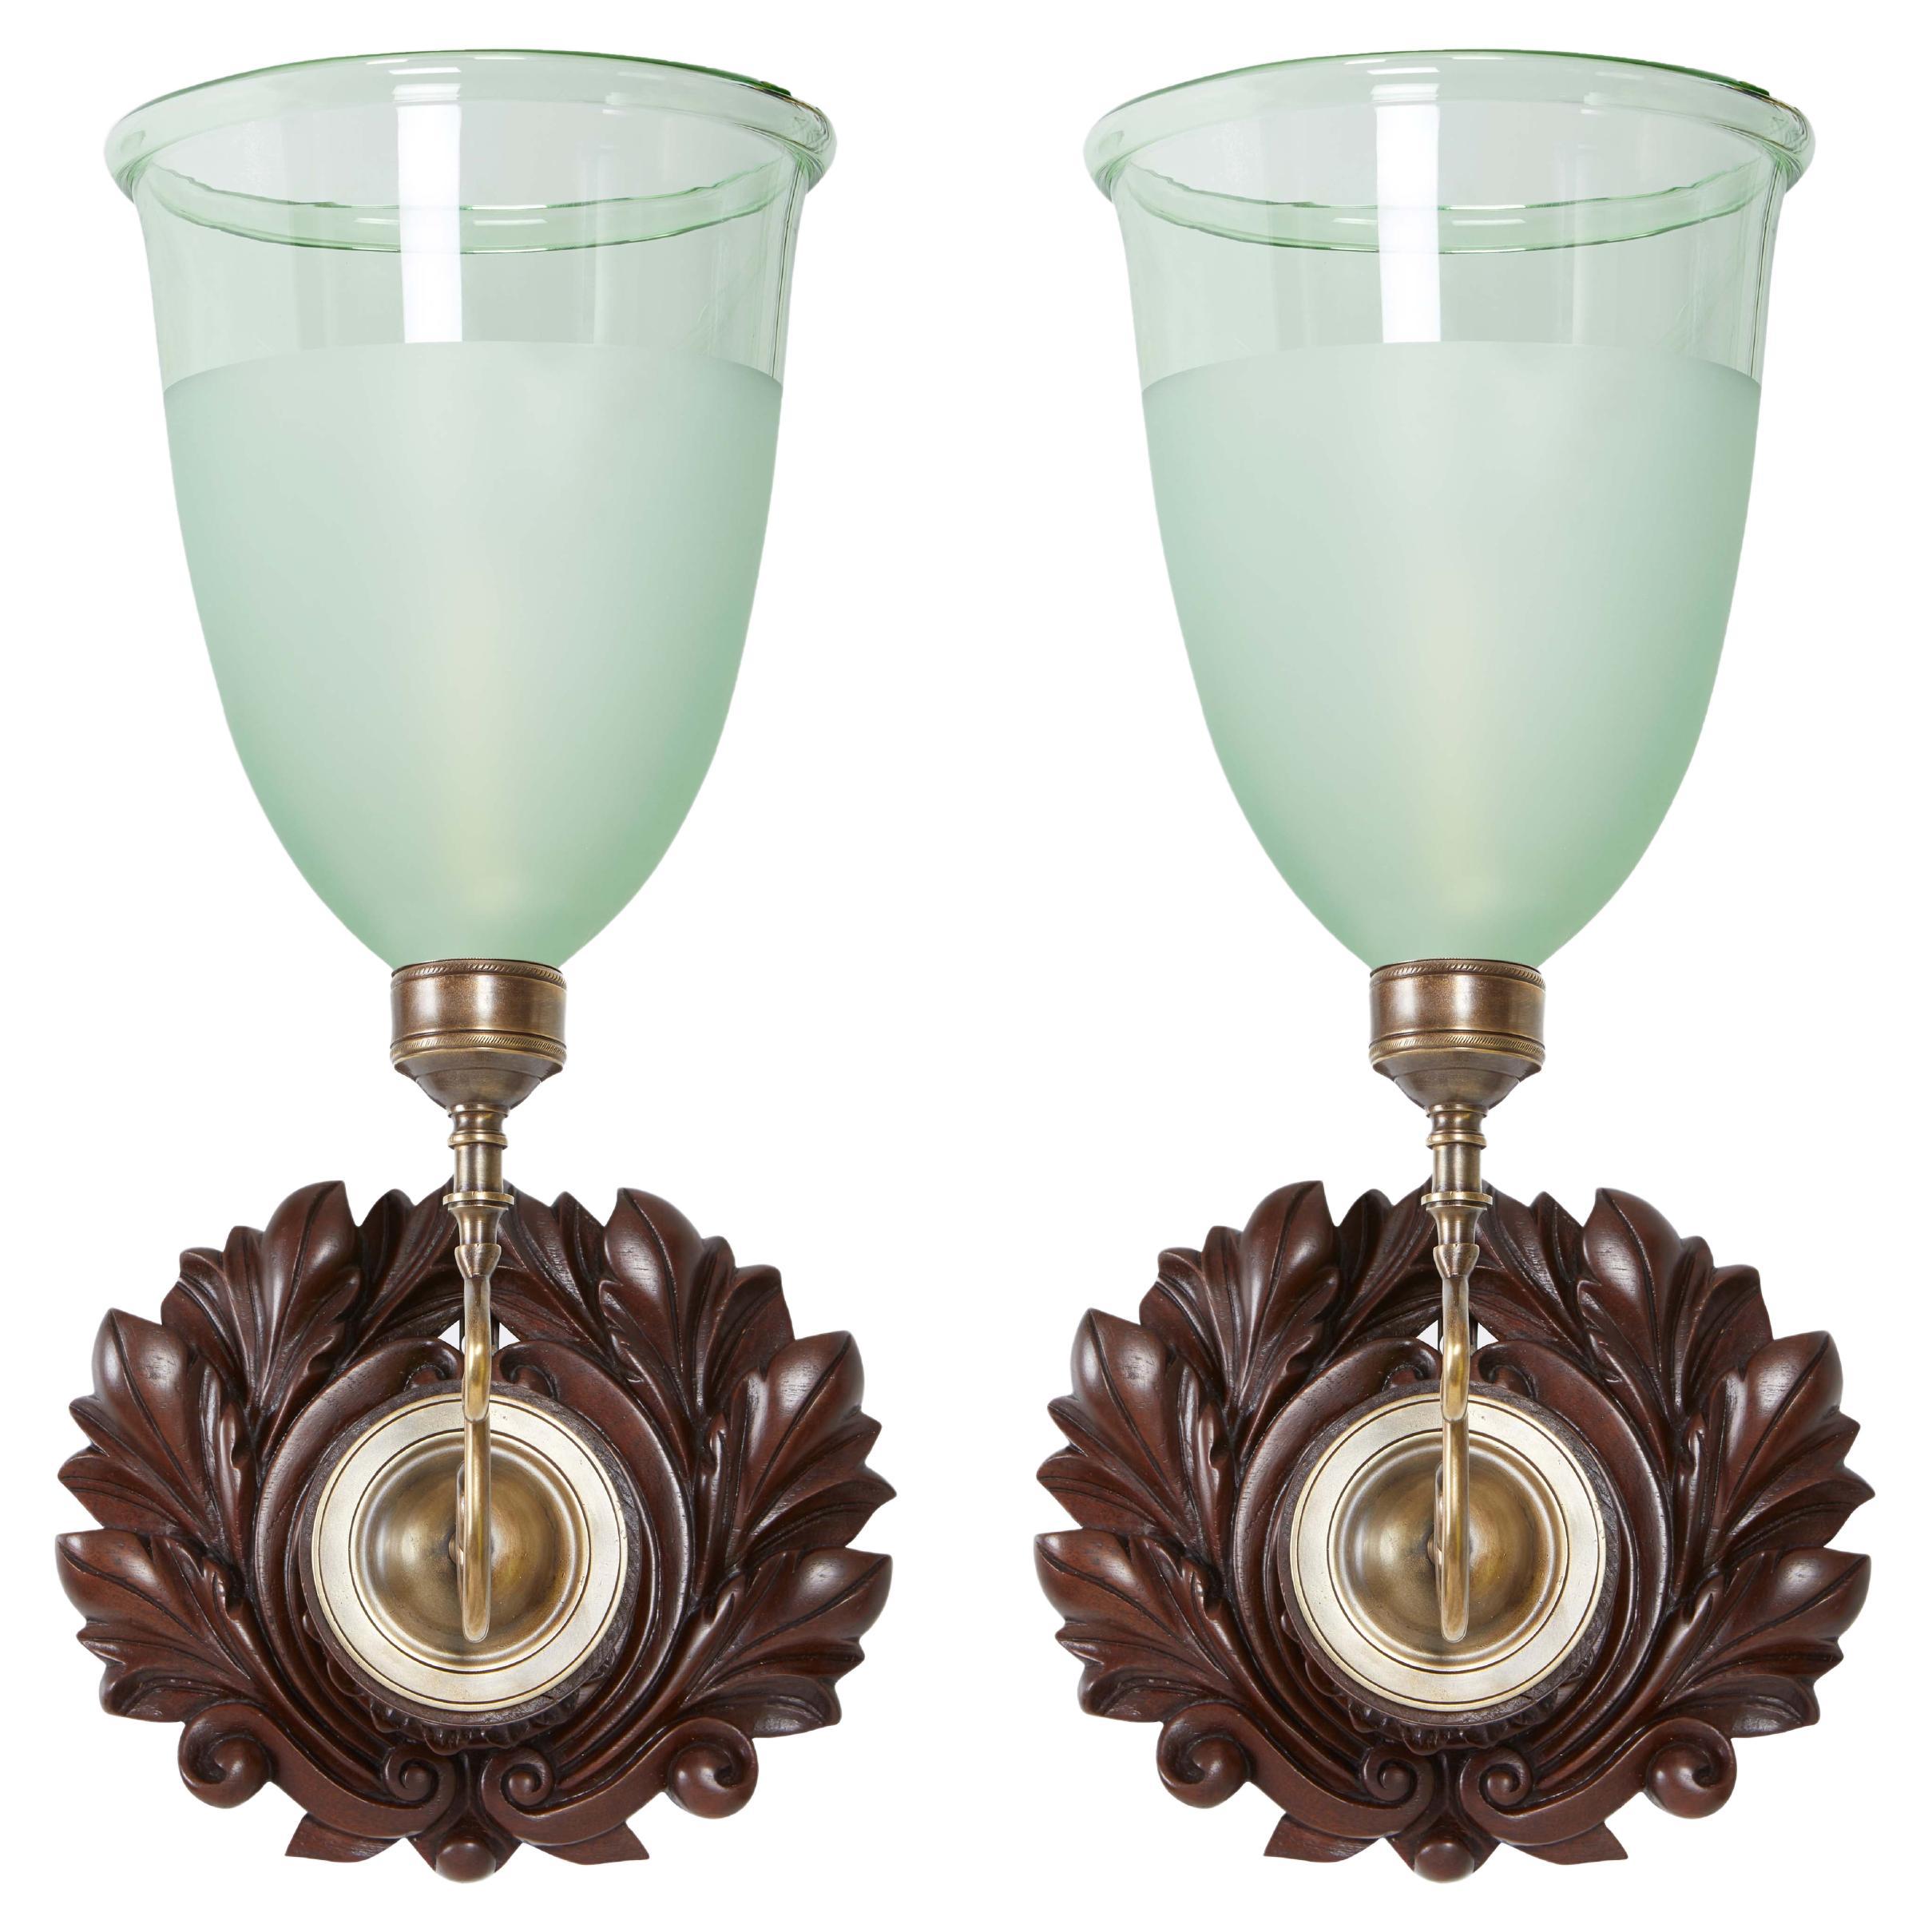 David Duncan Sconces with Large Wreath backplates and Green Frosted Shades